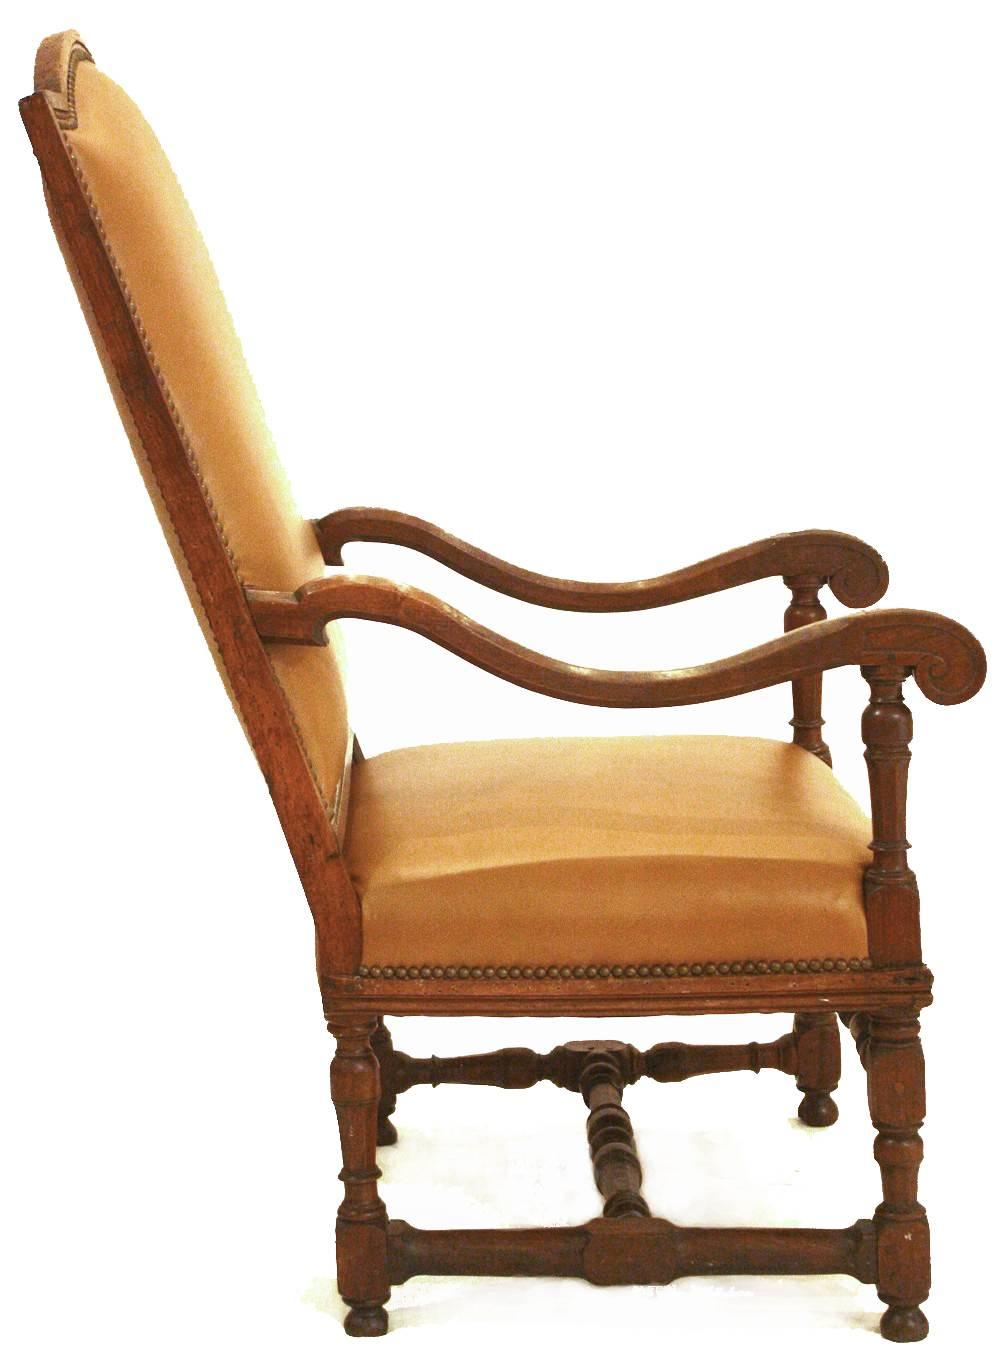 A large early 18th century Italian Baroque / Louis XIV-style high back armchair of walnut with shaped, curved arms and turned legs, front and rear, and turned stretchers, the chair has tall rectangular back with curved top, the whole newly